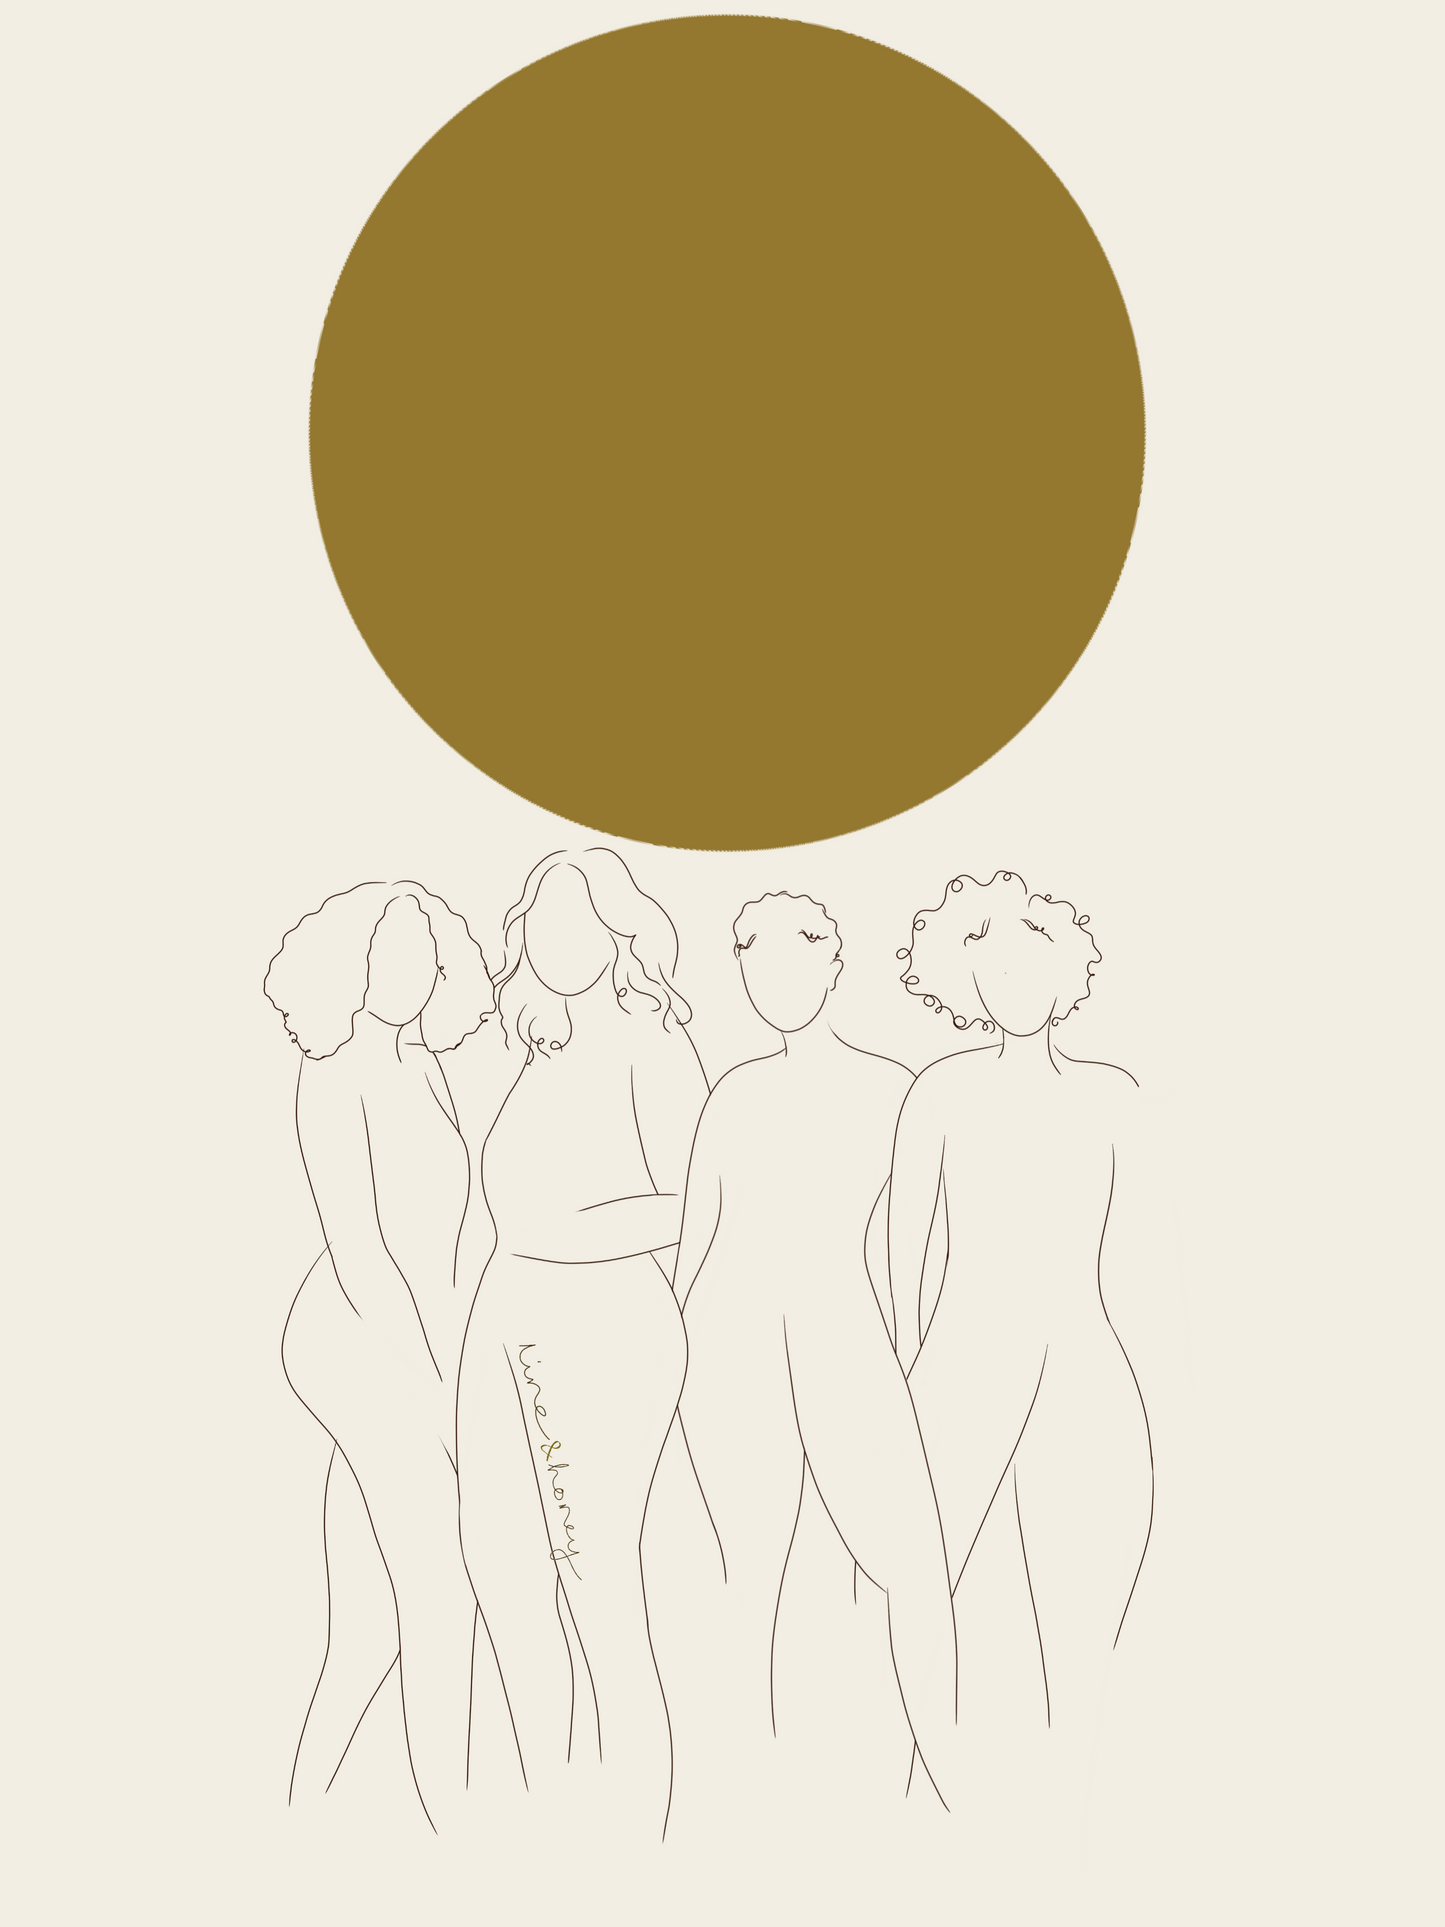 'We are the sun' print